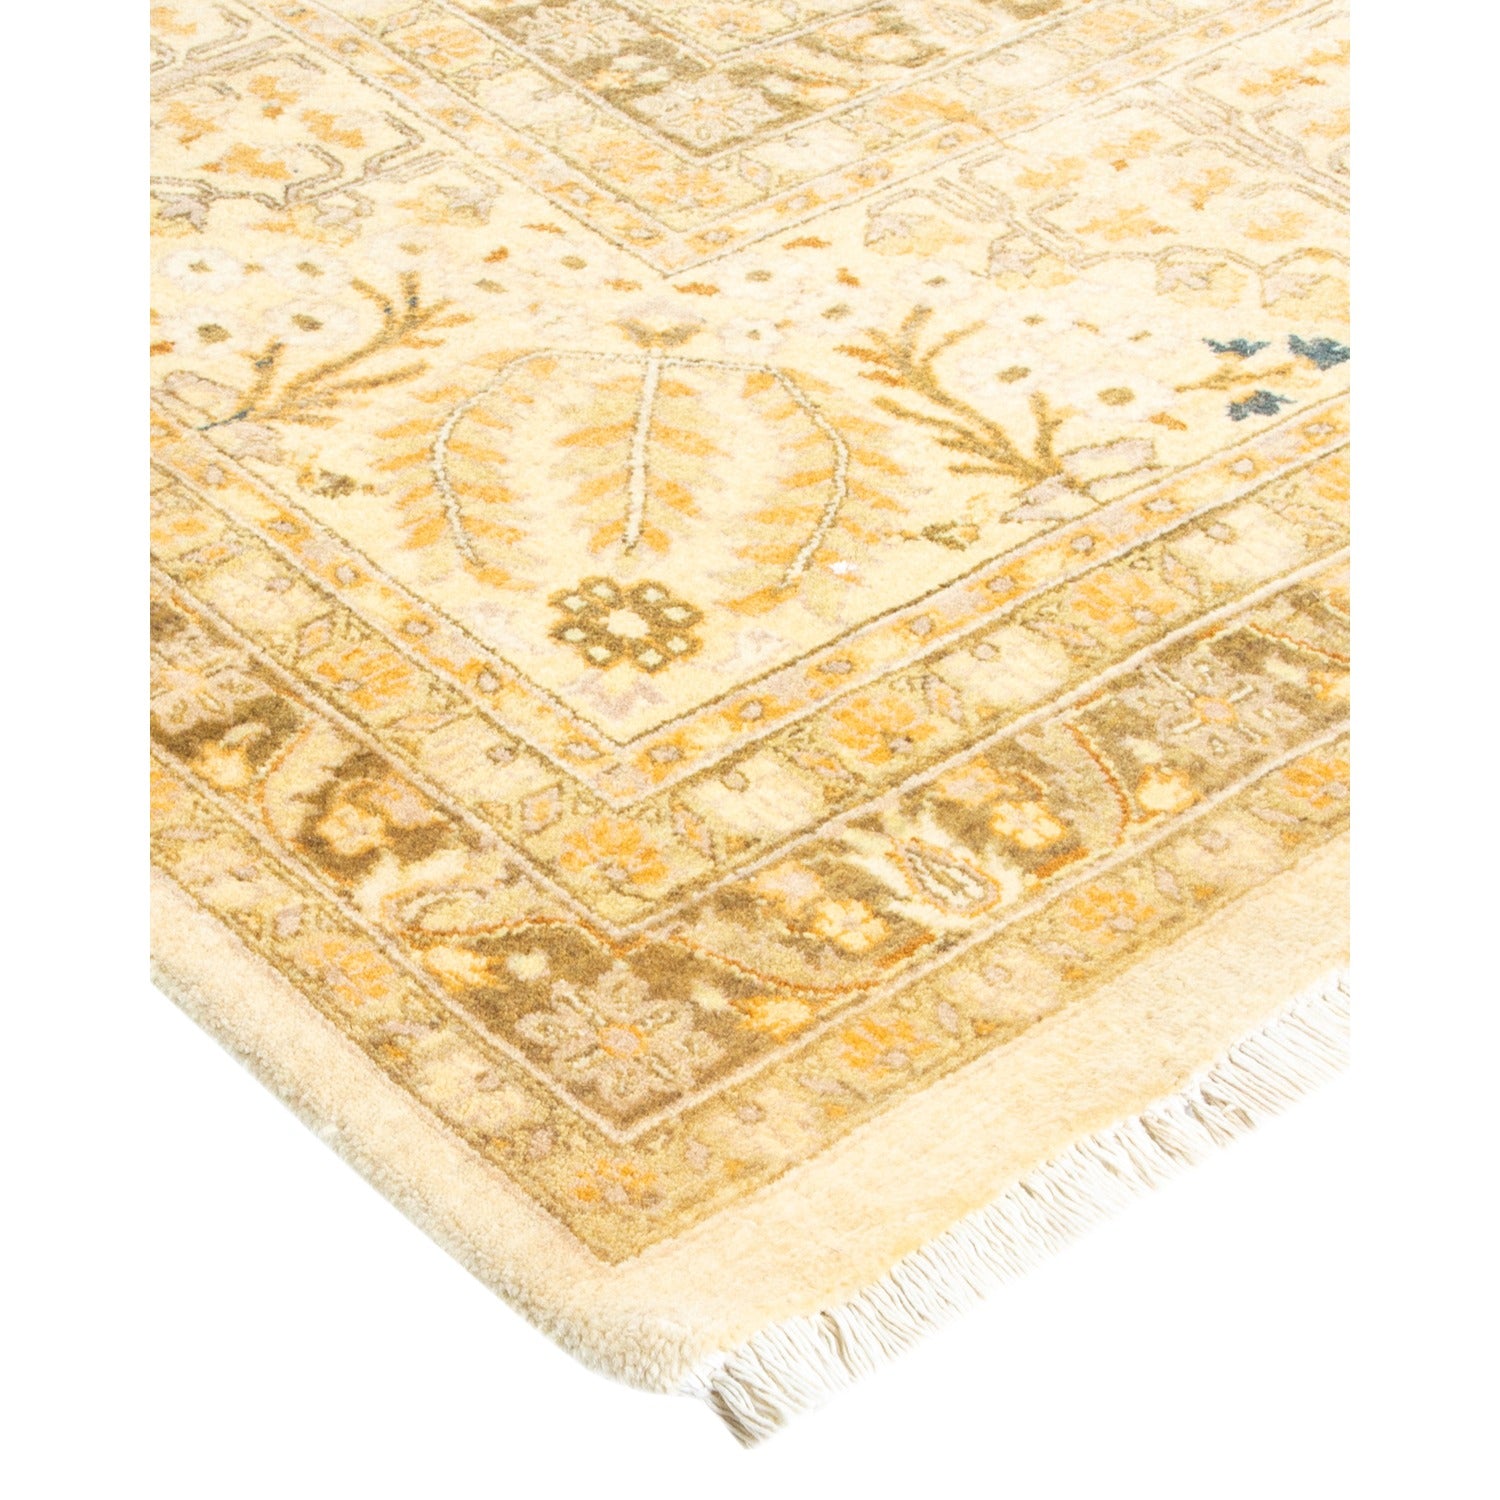 Intricate floral and geometric patterns adorn this oriental rug.